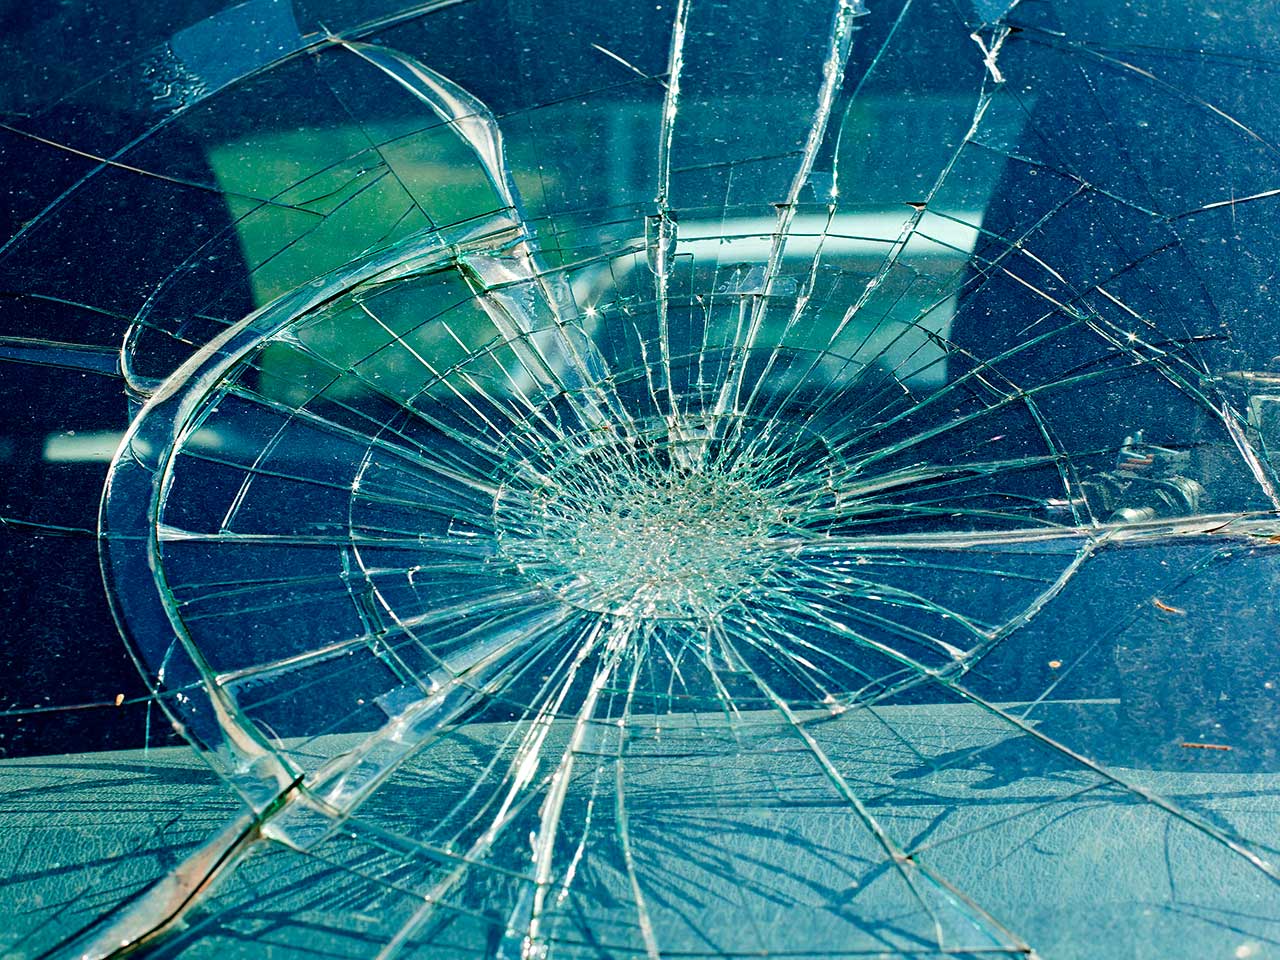 Smashed windscreen after an accident